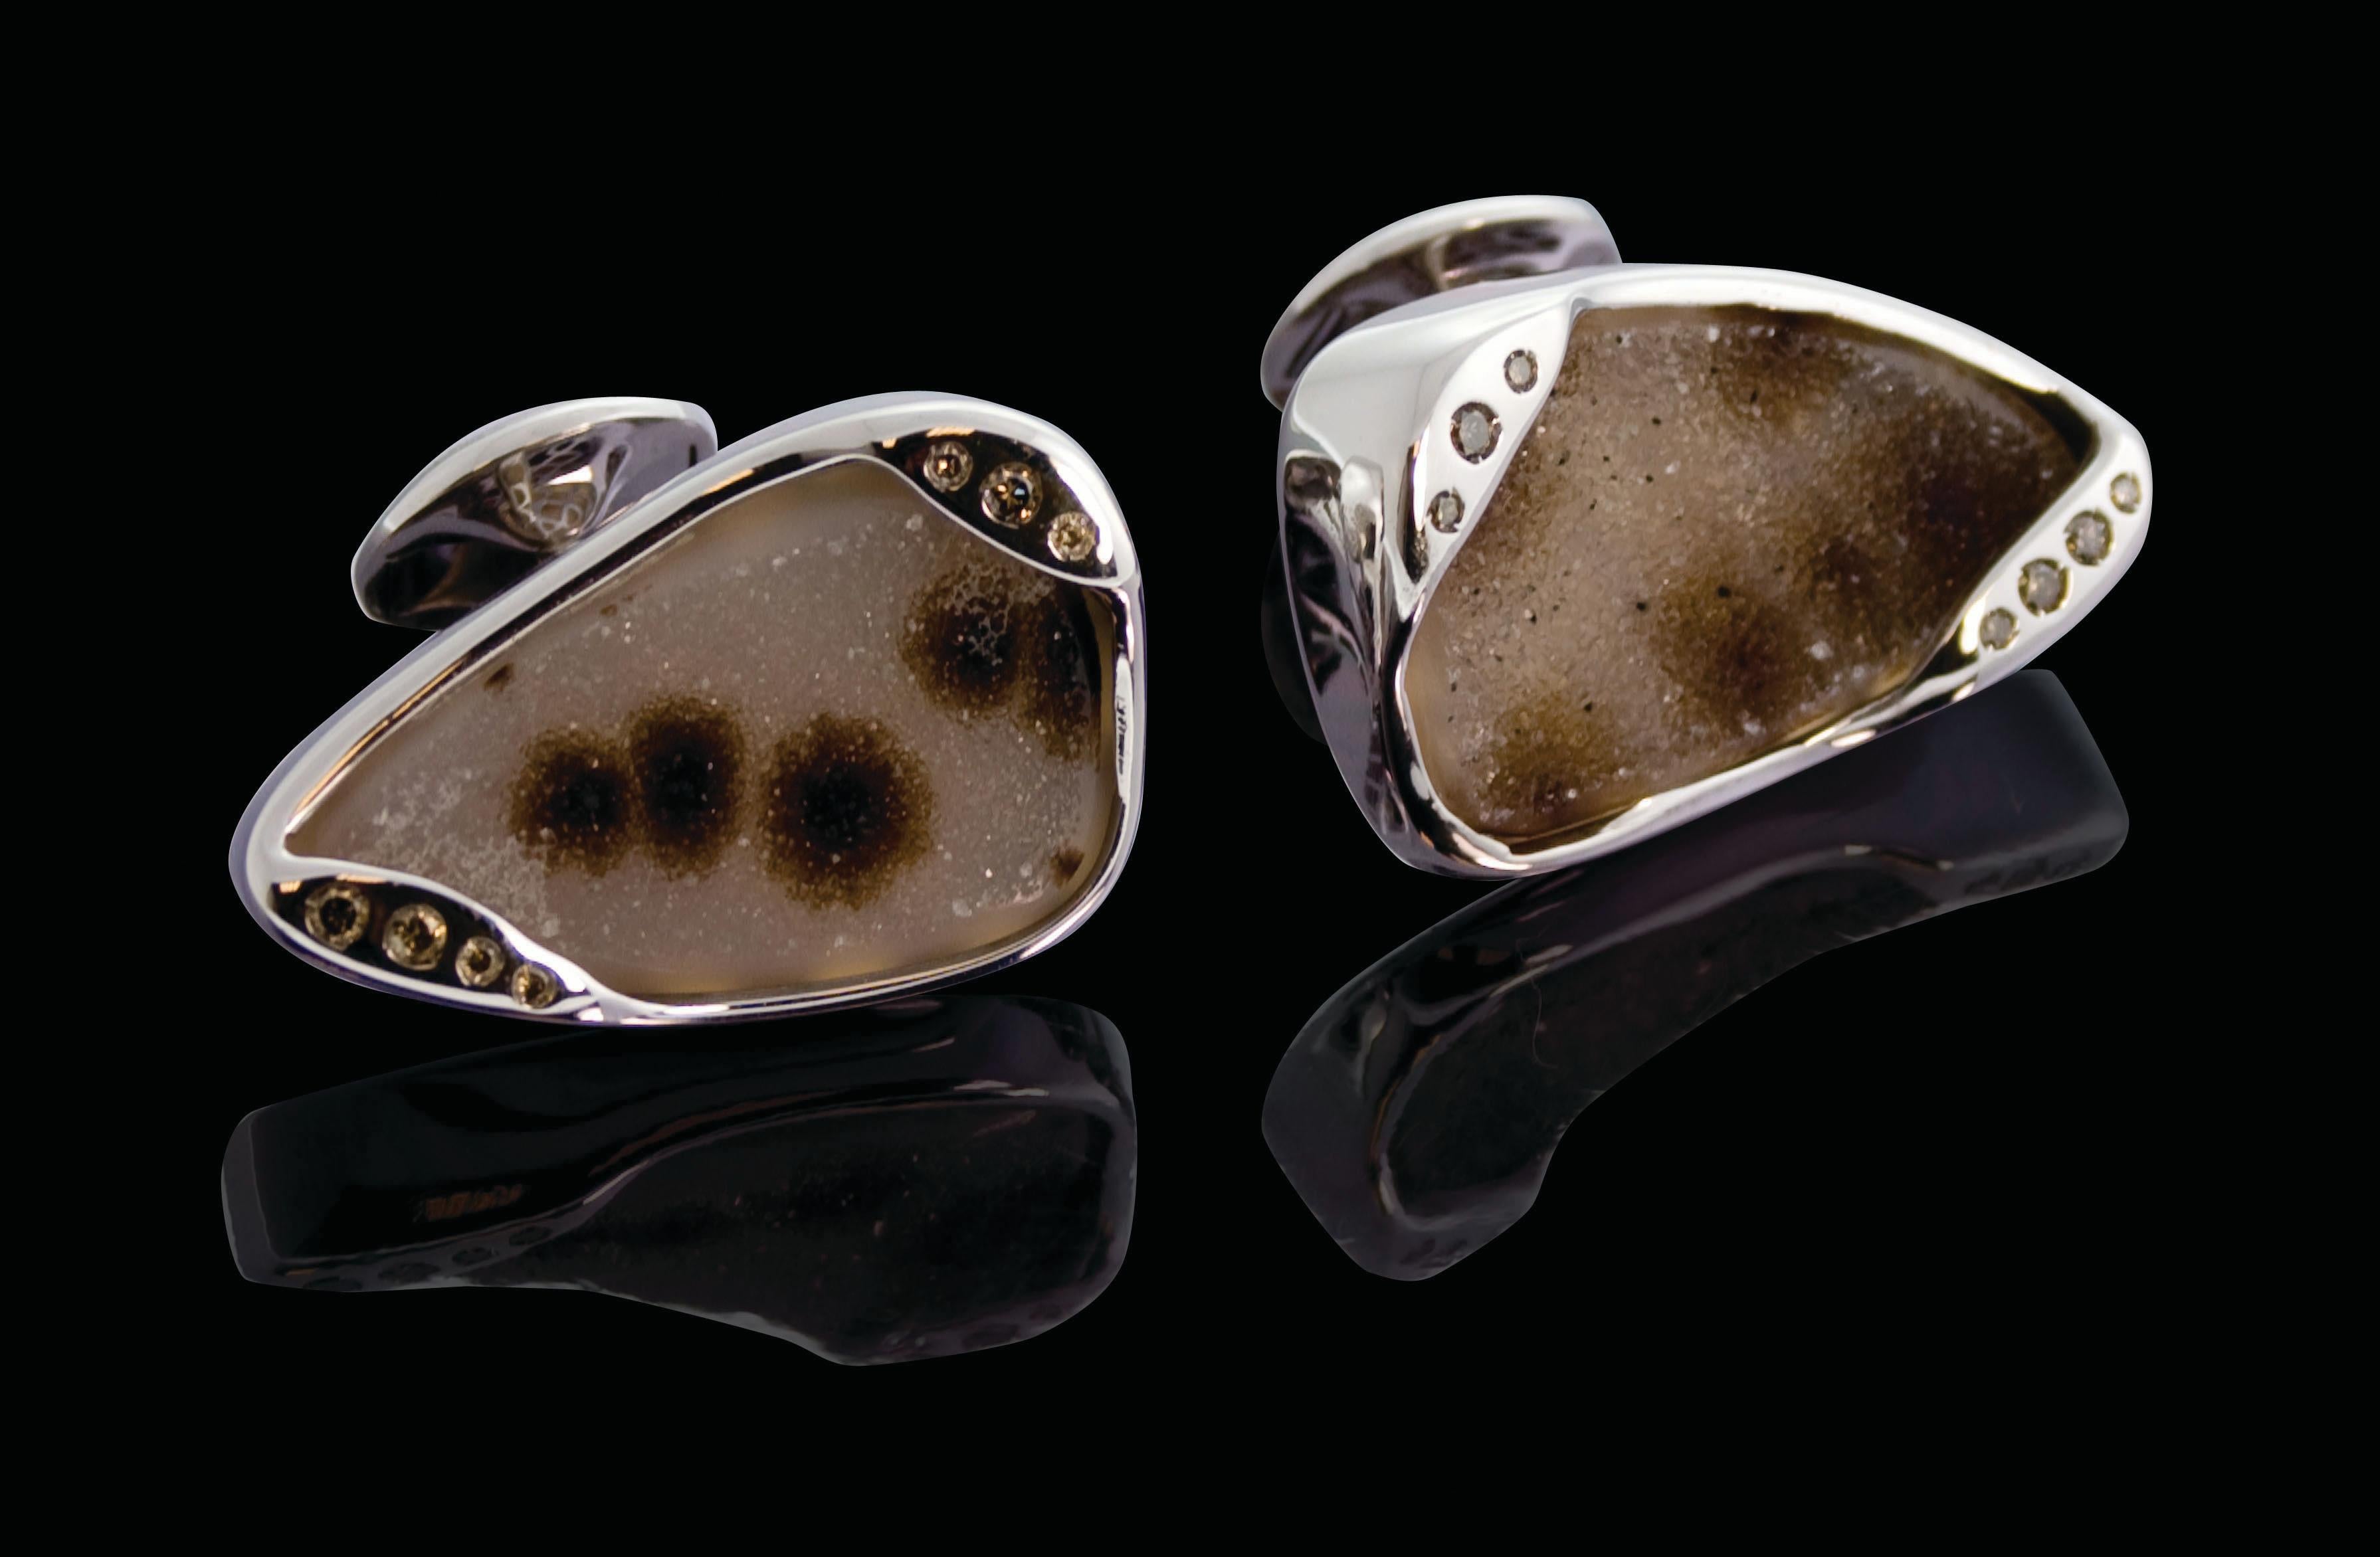 An extraordinary pair of cufflinks of unusual and eye catching stone, all with an organic bezel setting, dotted with subtle diamonds. A magnificent accessory with unique characteristics.
